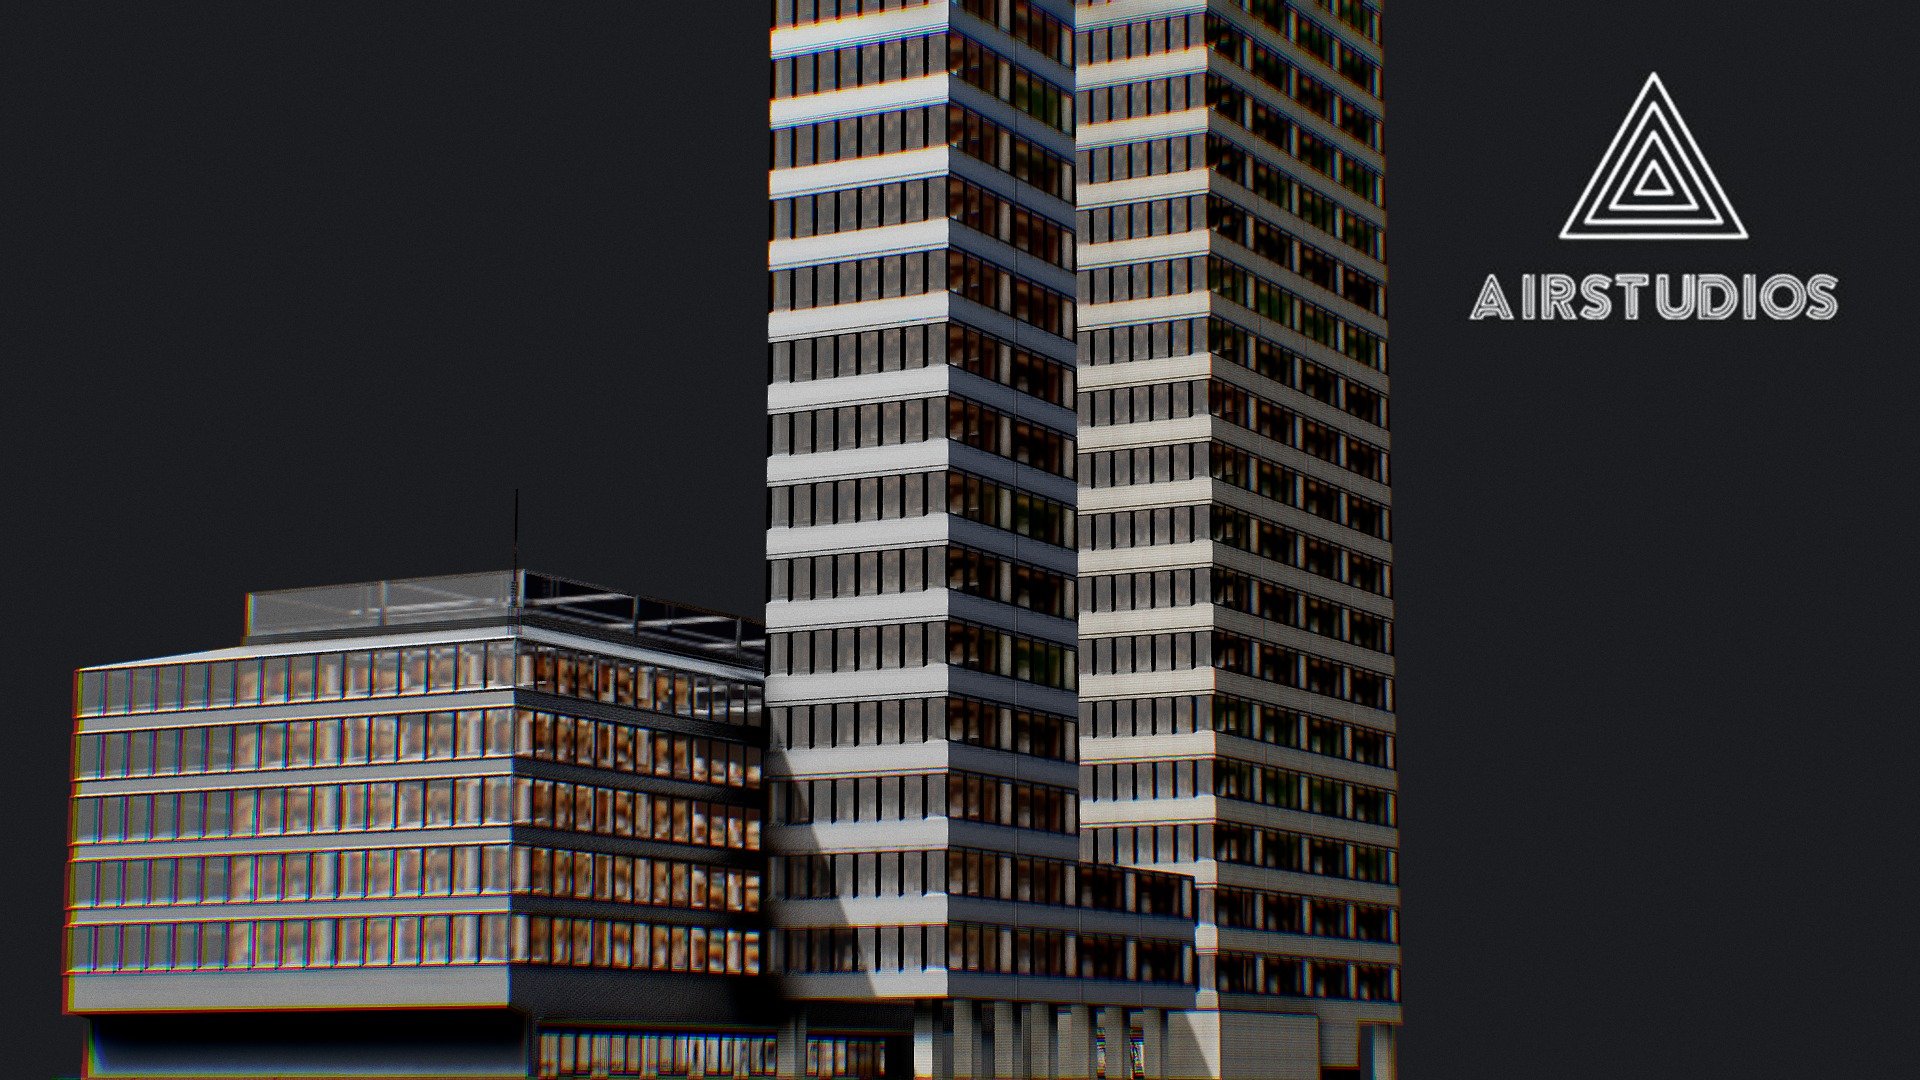 Low Poly - New York City Block 4

Made in Blender - Low Poly - New York City Block 4 - Buy Royalty Free 3D model by AirStudios (@sebbe613) 3d model